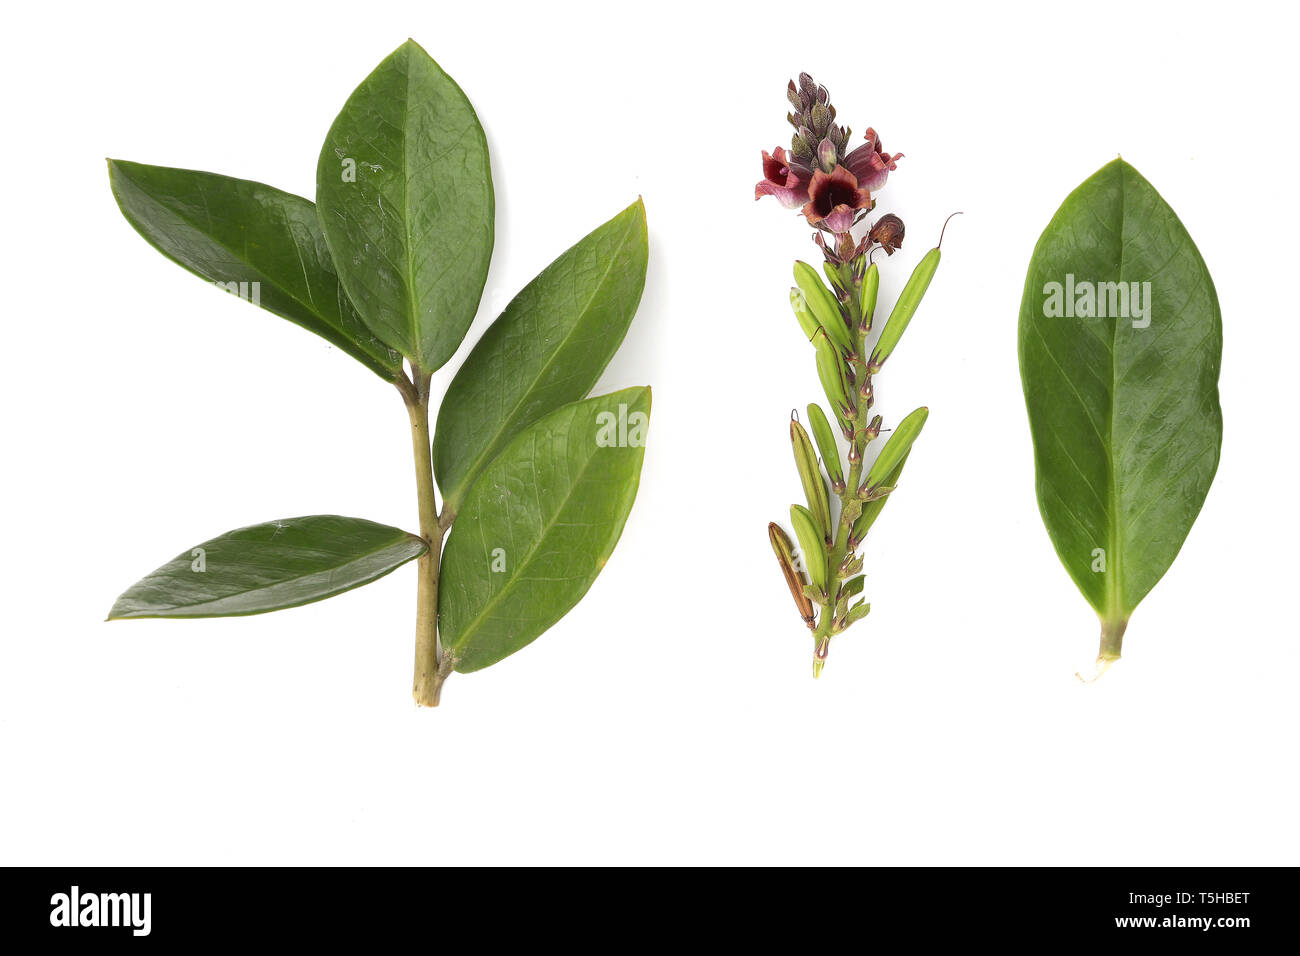 Zamioculcas. Dollar tree. Secculent. Green leaf. Indoor flower. Madagascar is a plant. Zamiokulkas isolated on white background High resolution image  Stock Photo